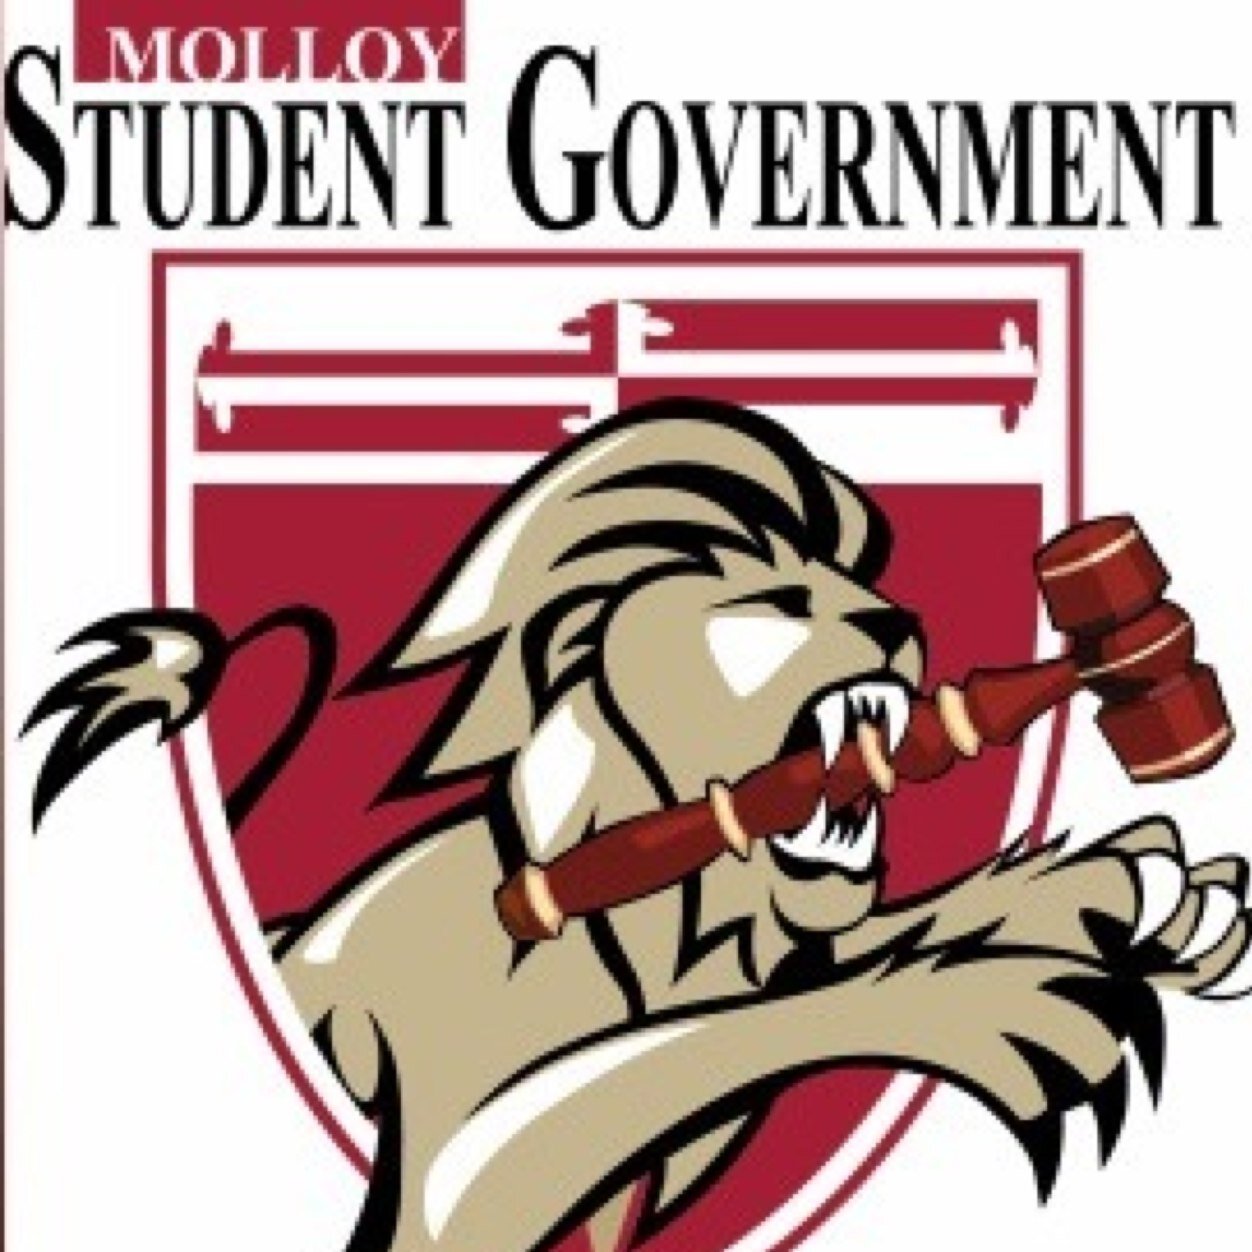 Official Twitter Account for Molloy Student Government! Follow for updates, events and news! https://t.co/Ki4ti1xM1P